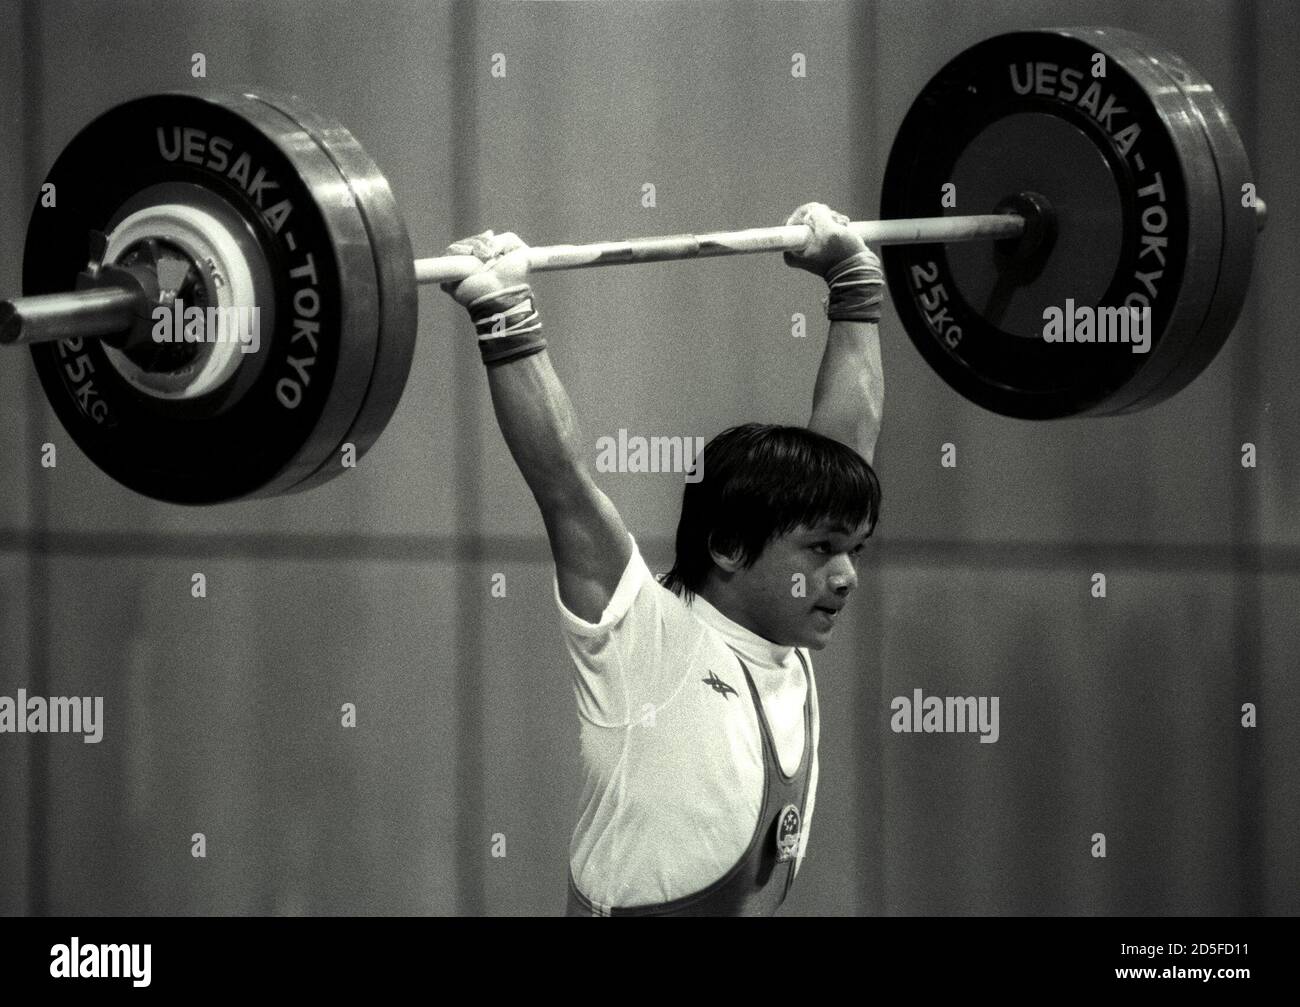 He Zhuoqiang of China wins the clean and jerk weightlifting competition by lifting 137.5 kgs during the Asian Games in Seoul, September 21, 1986. Zhuoiang set a new Asian Games record by winning with a total weight of 247.5 kgs. SCANNED FROM NEGATIVE REUTERS/Gene Del Bianco  GDB/CMC/PN Stock Photo